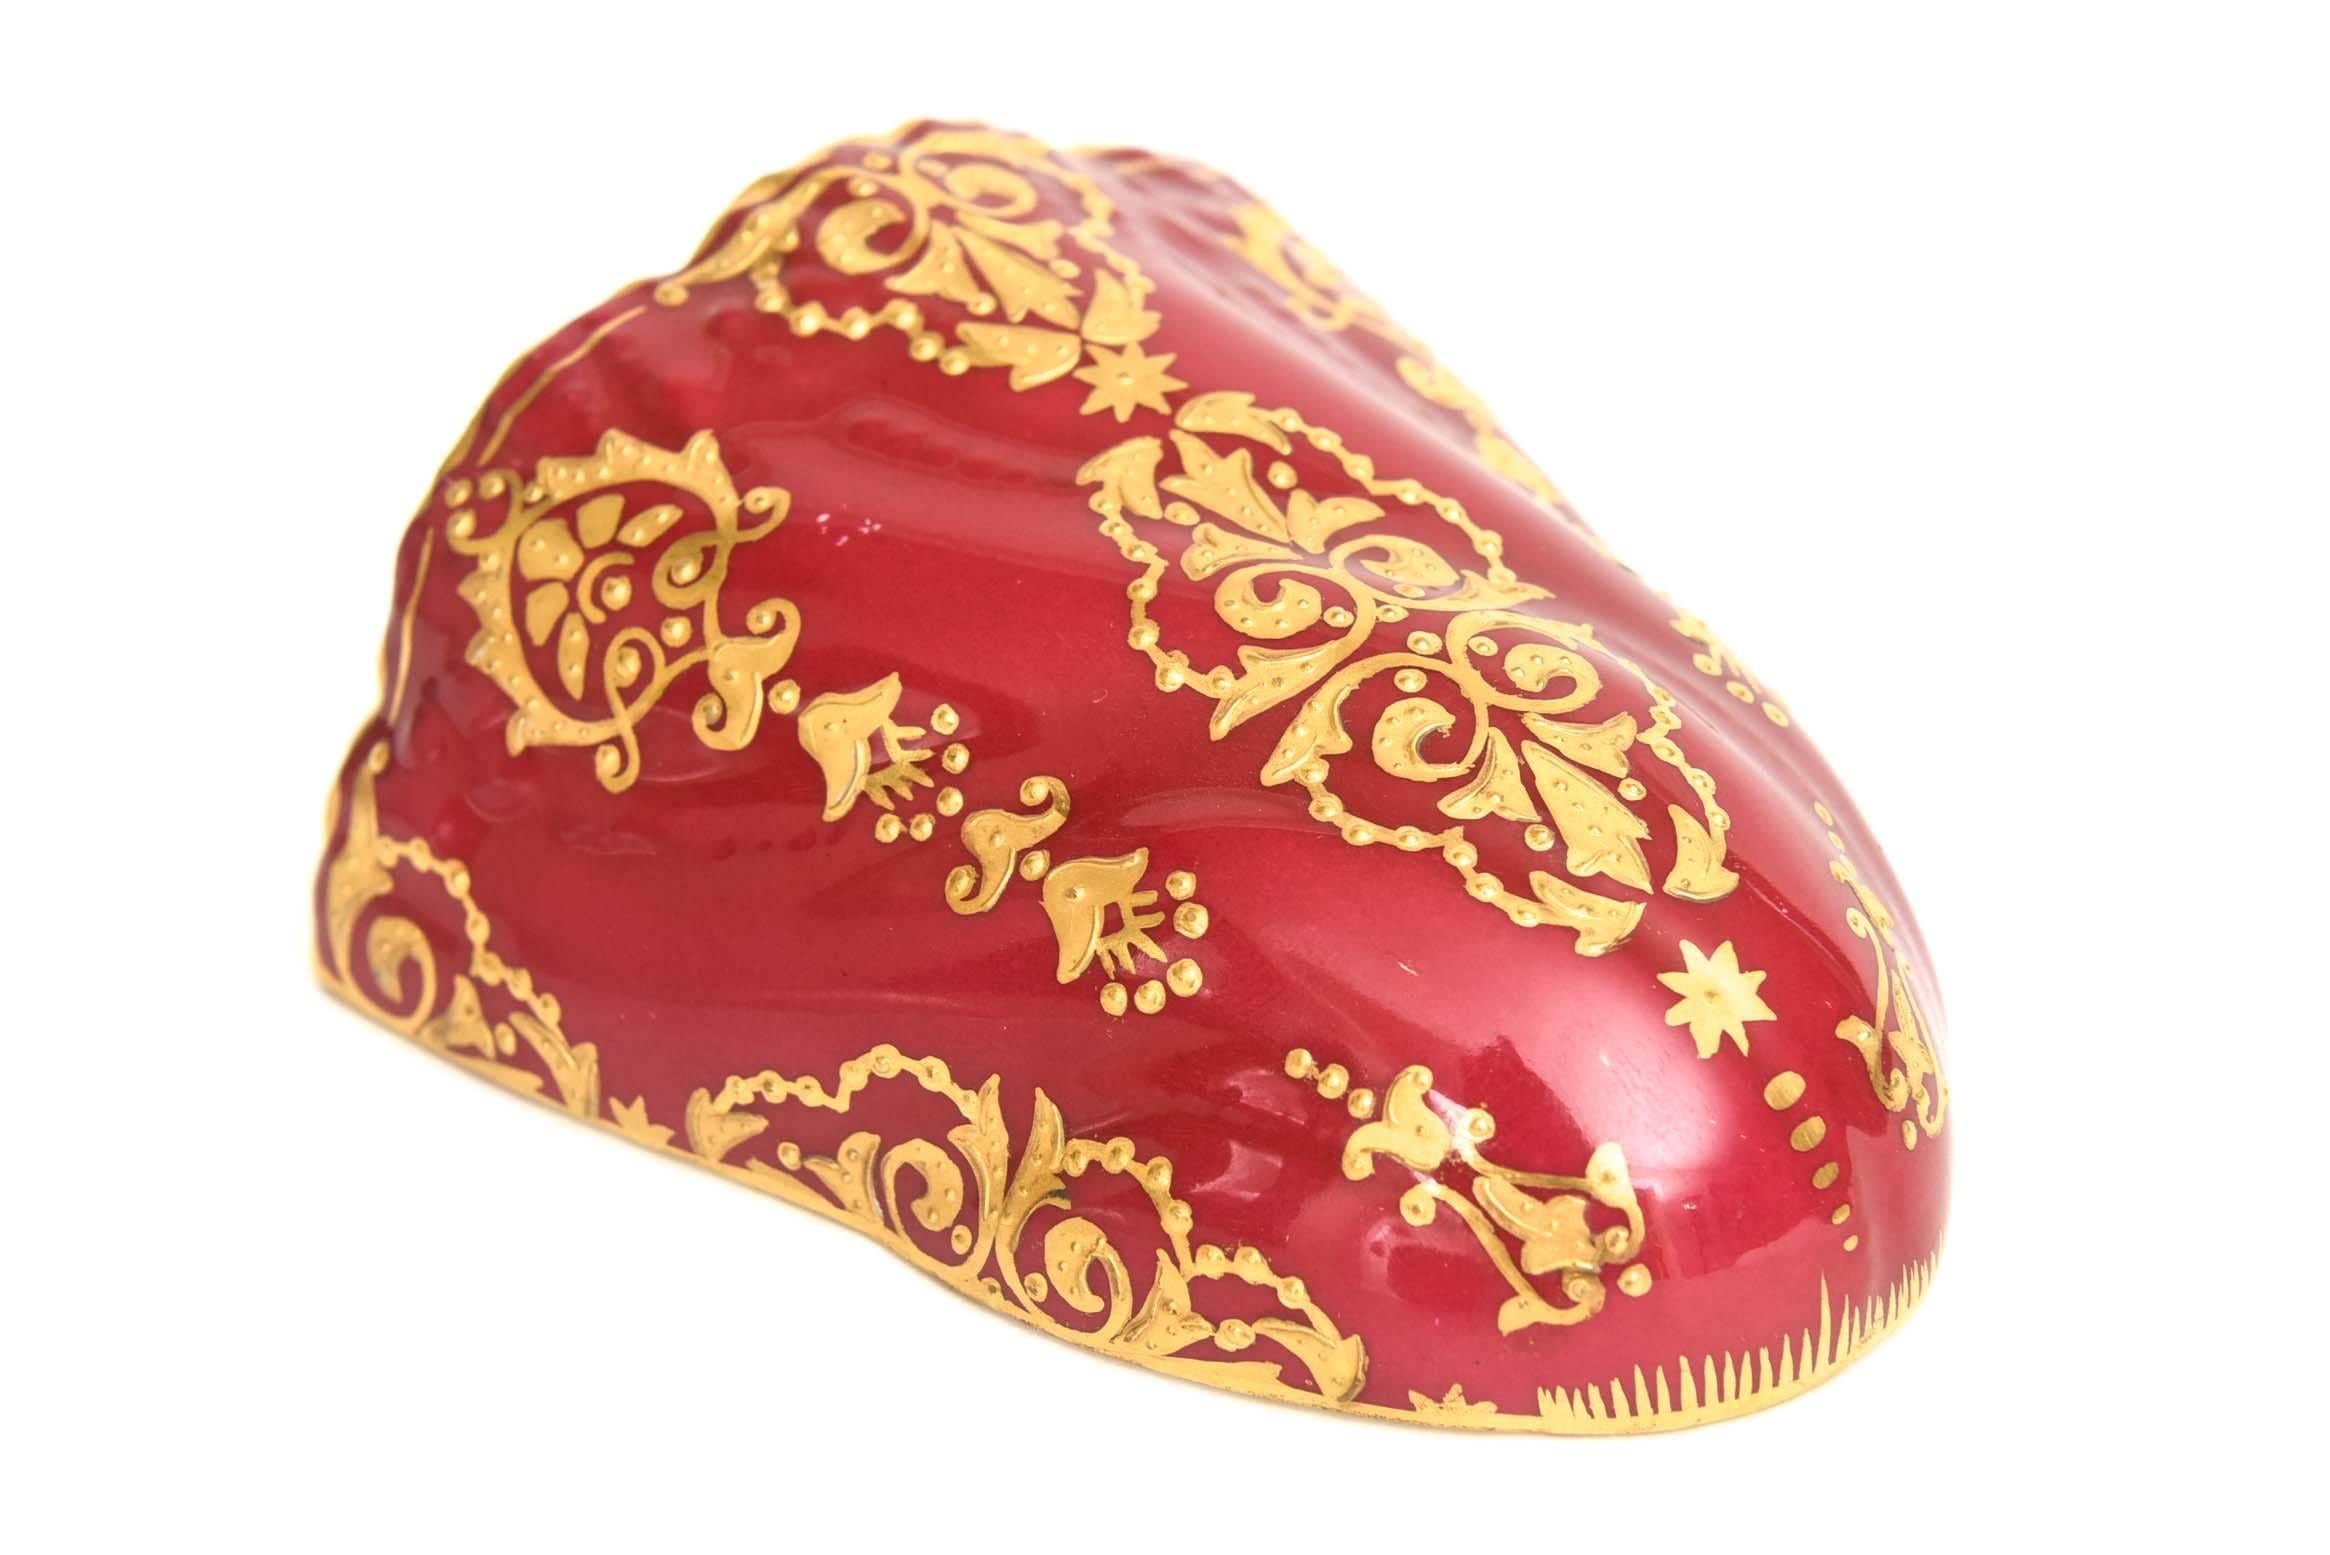 Early 20th Century Charming Wall Pocket by Coalport, England, a Ruby Red and Gilt Encrusted Jem